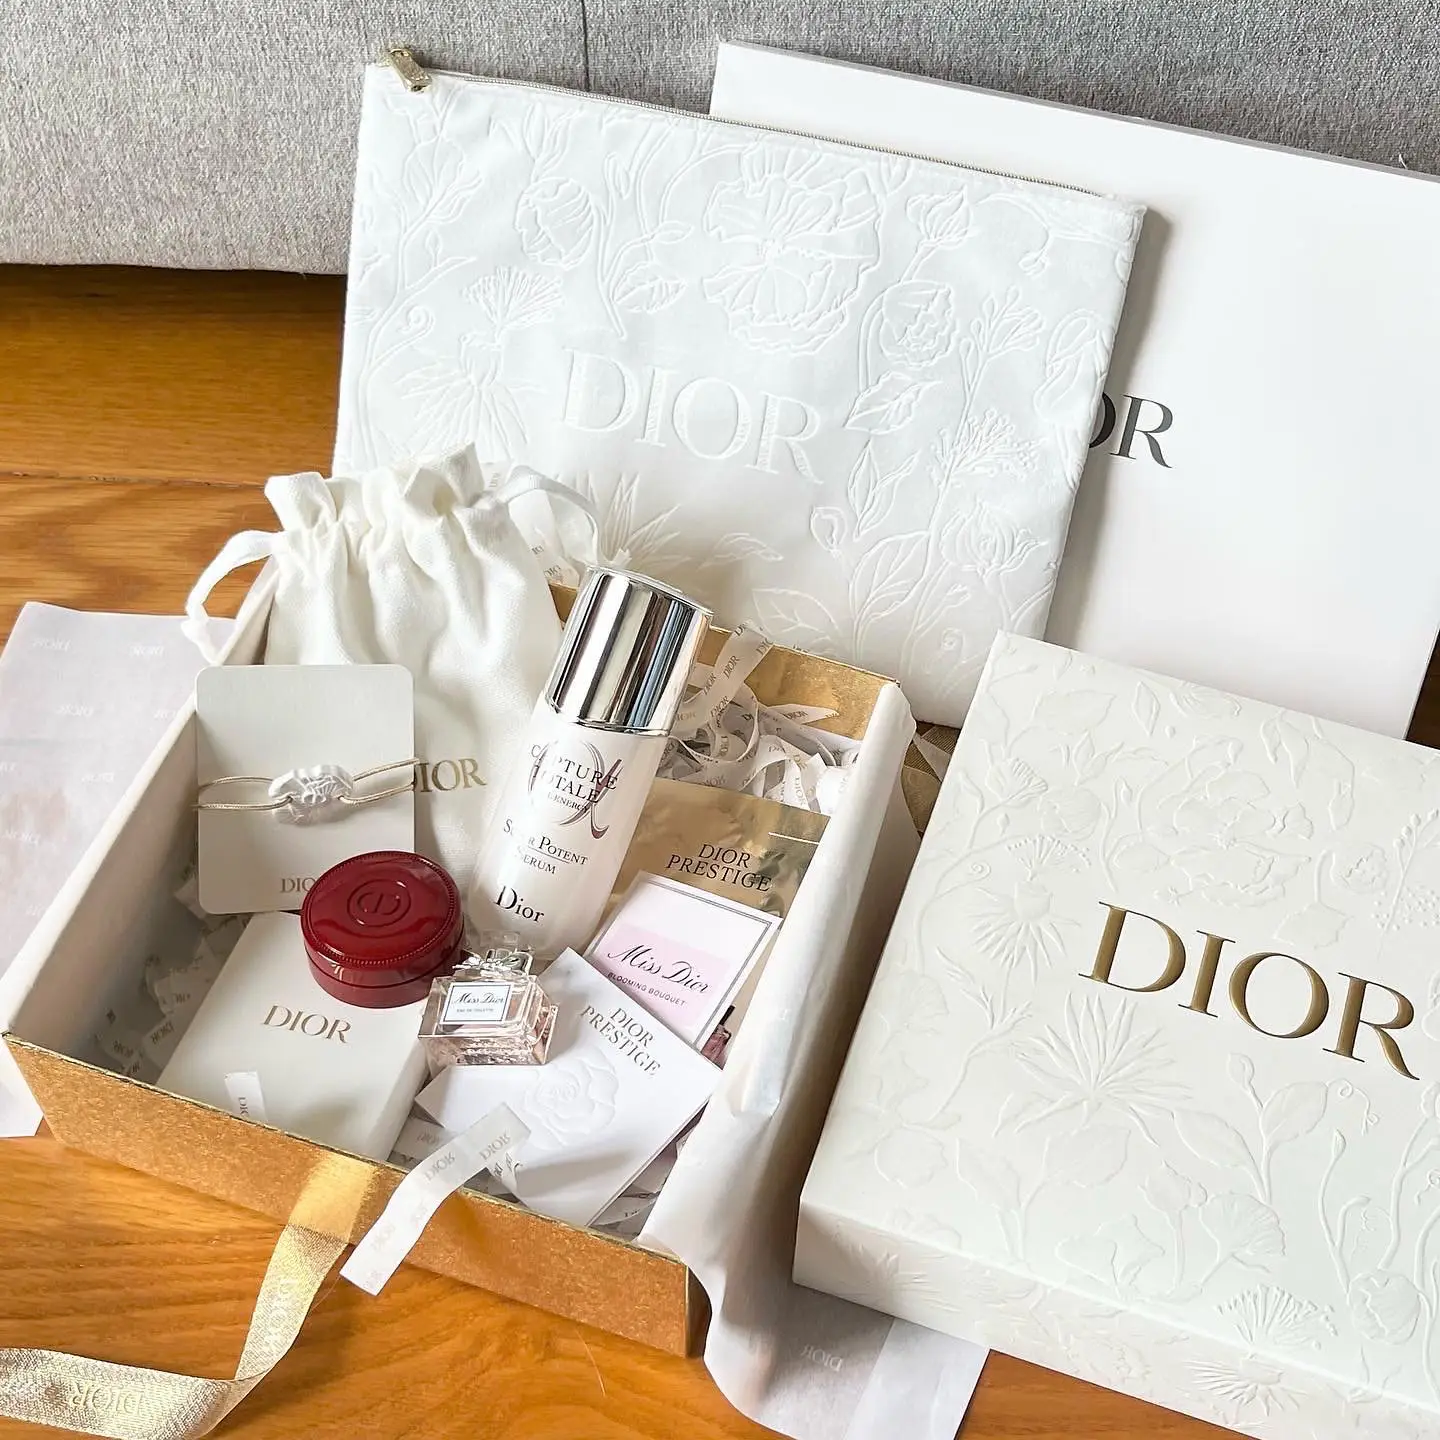 Mother's Day gift. - Picture of DIOR Café, Seoul - Tripadvisor